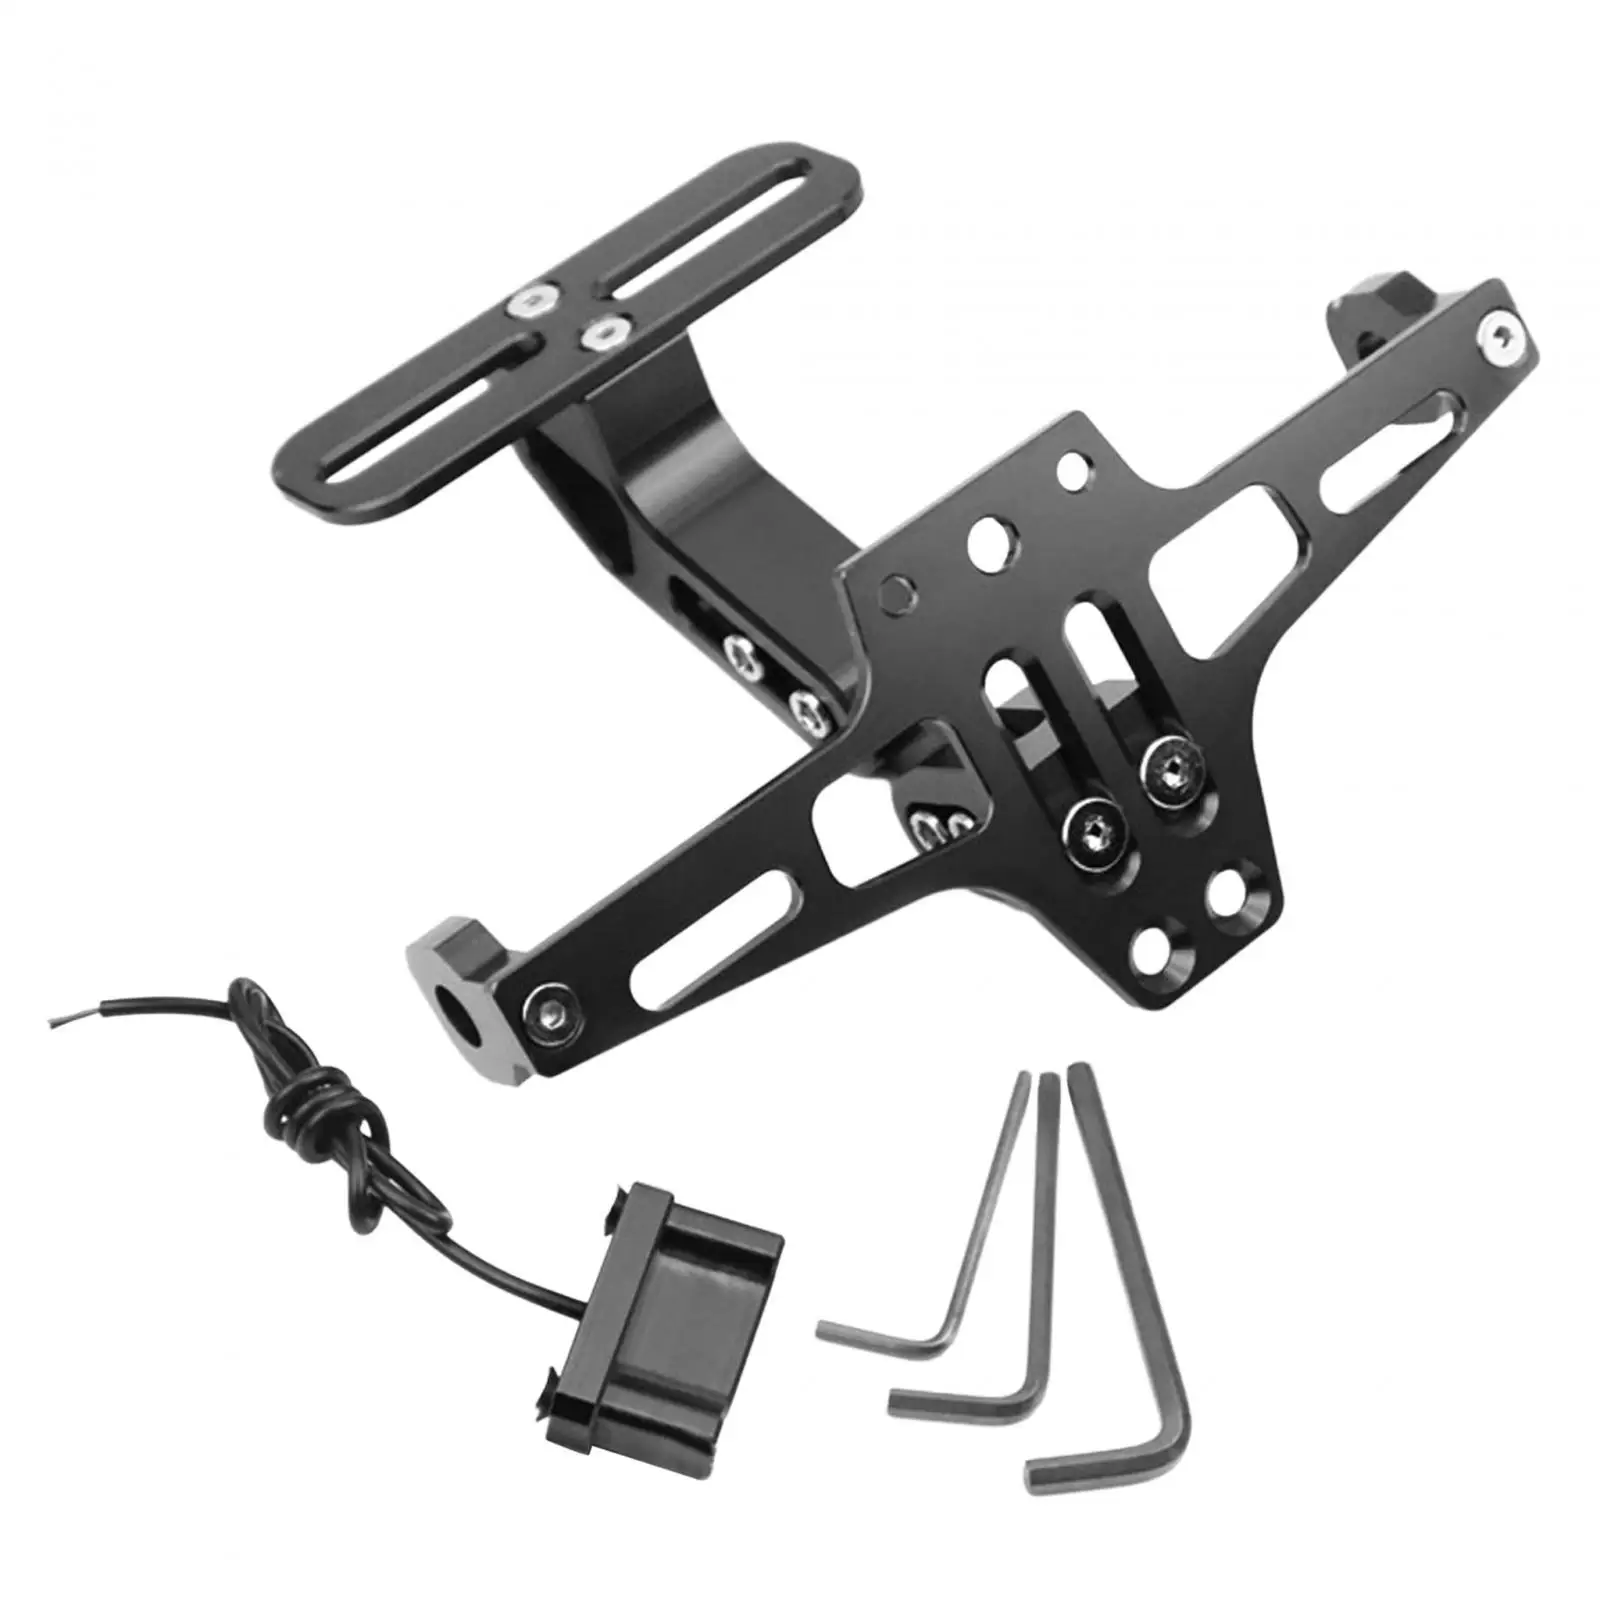 Motorcycle License Plate Bracket Adjustable Angle Motorbike Accessories Easy to